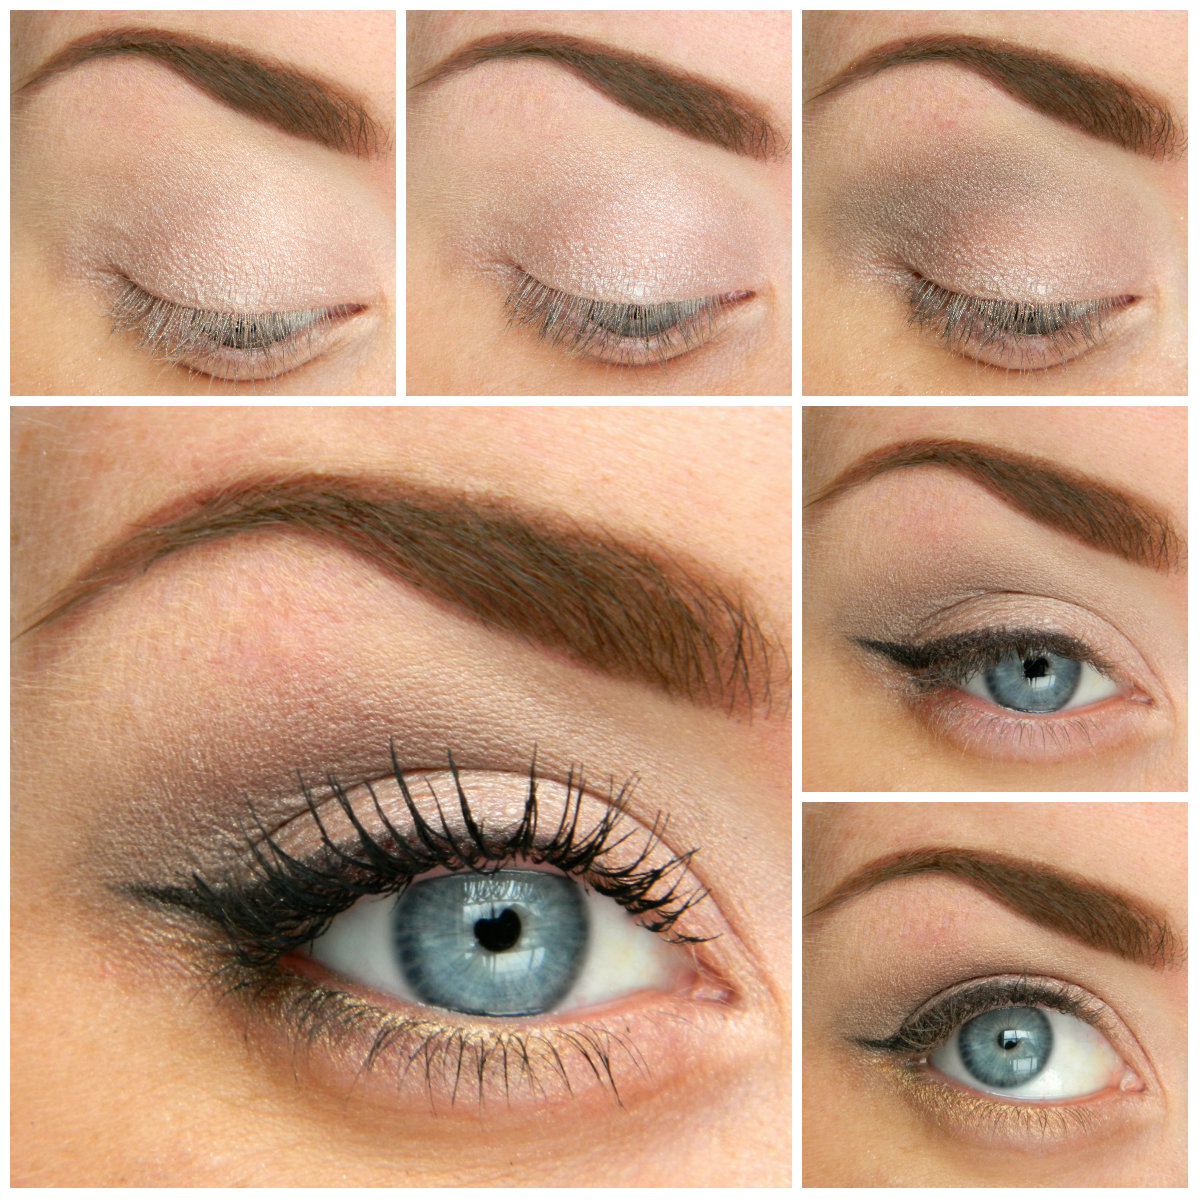 Homecoming Makeup For Blue Eyes 5 Ways To Make Blue Eyes Pop With Proper Eye Makeup Her Style Code